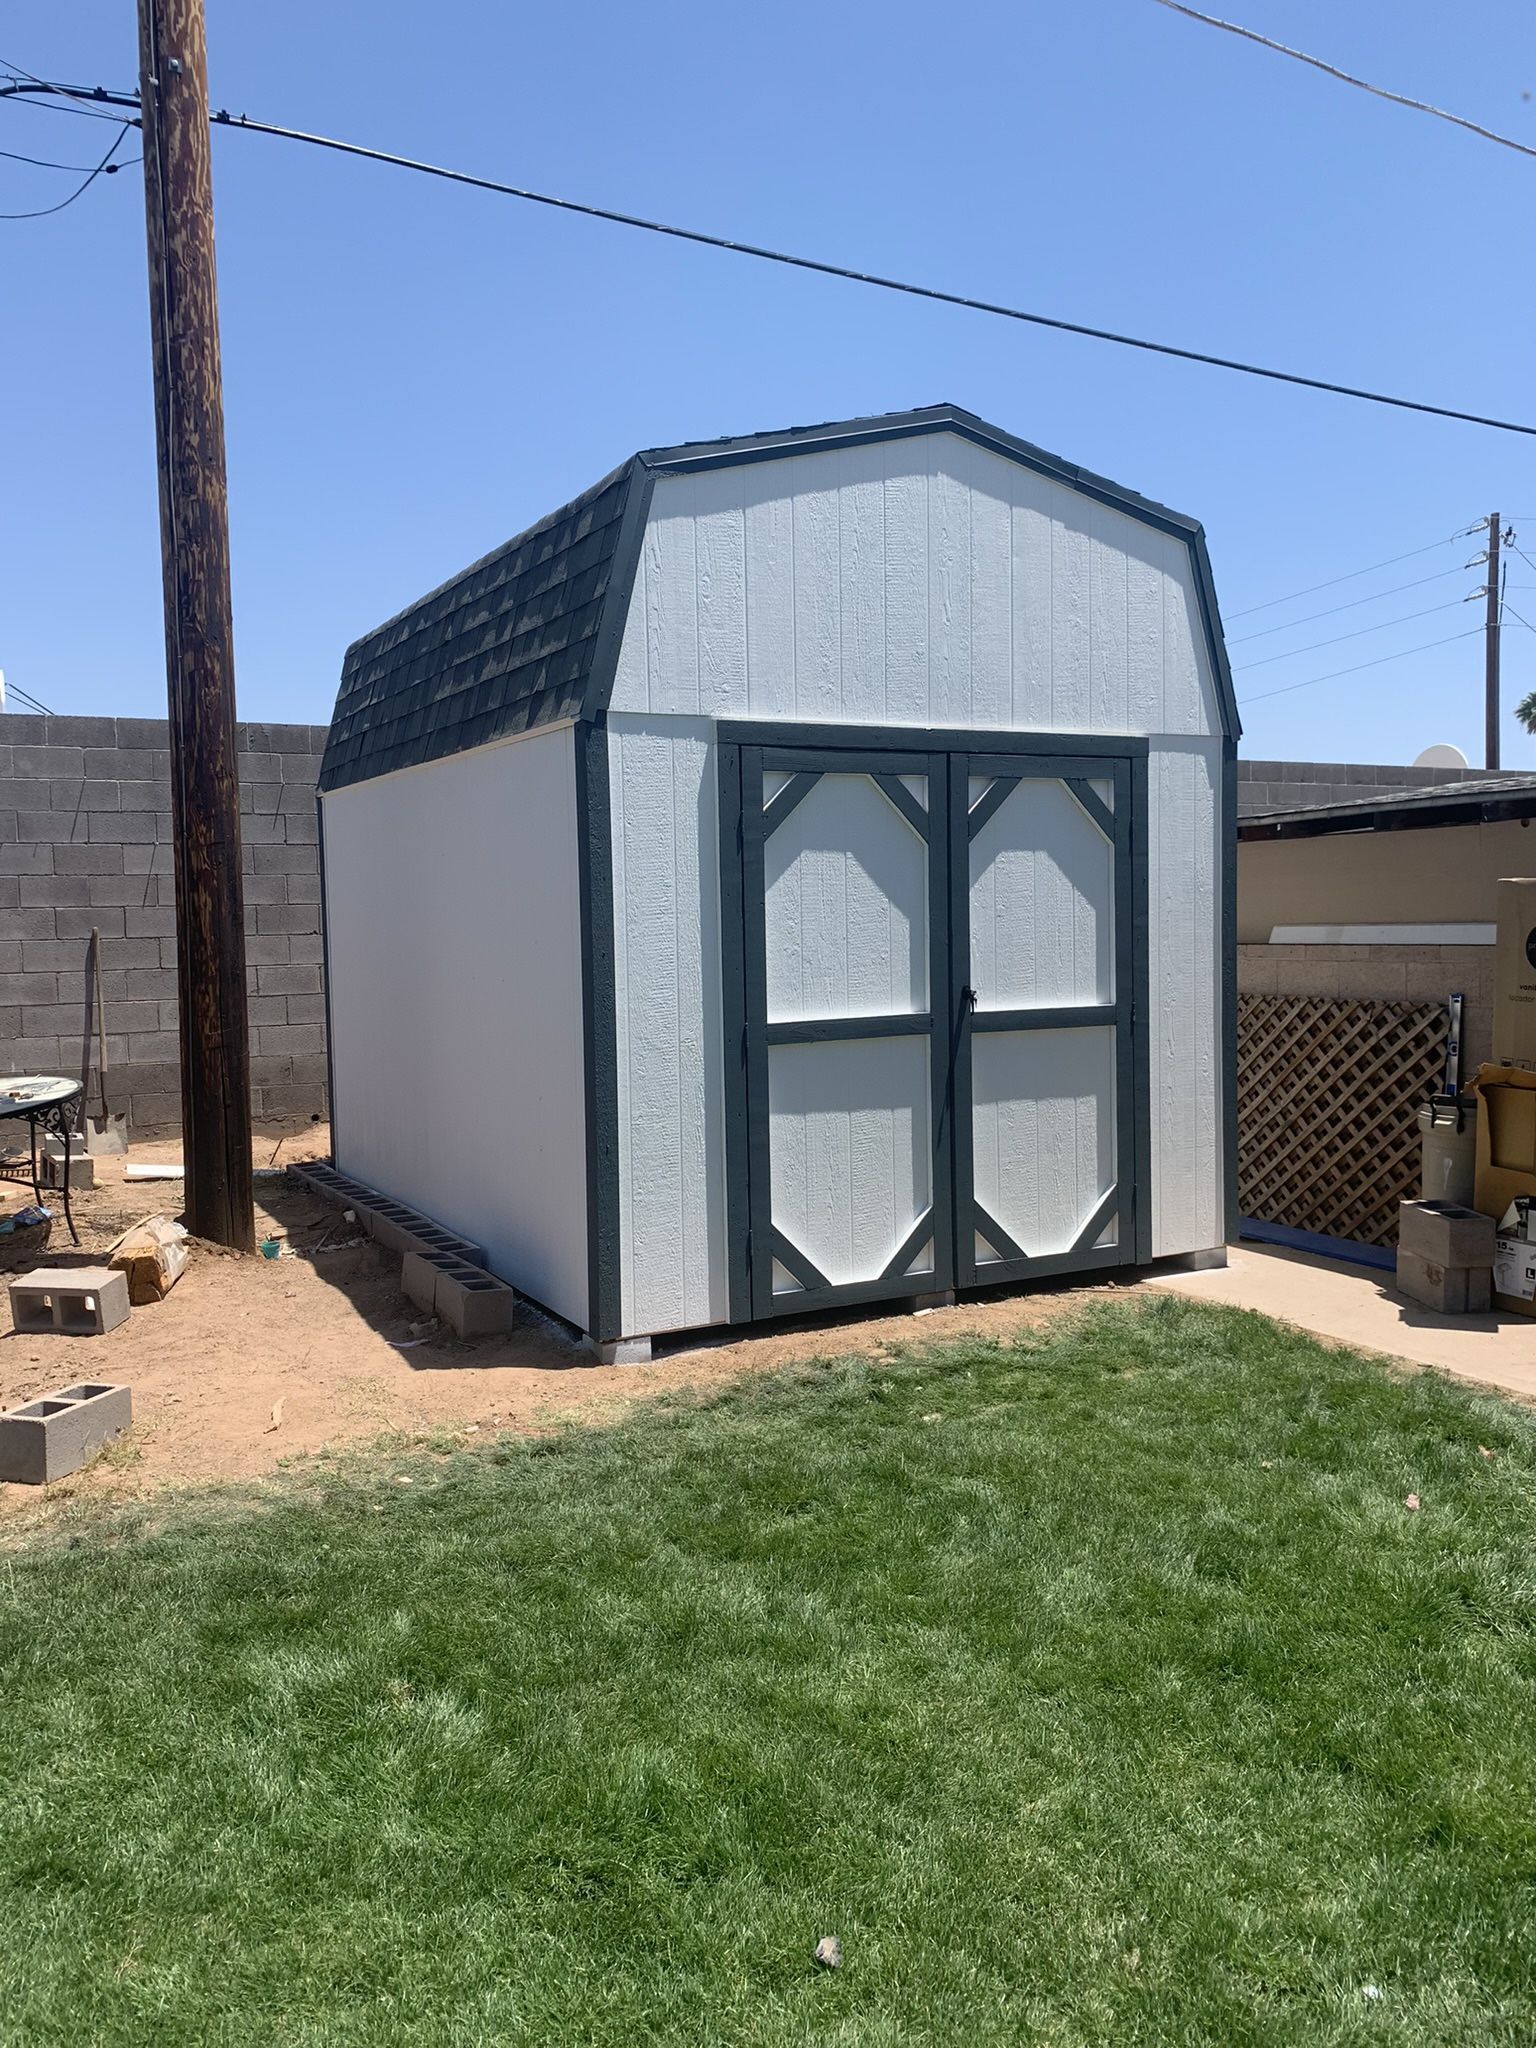 10x12 Barn Style Shed